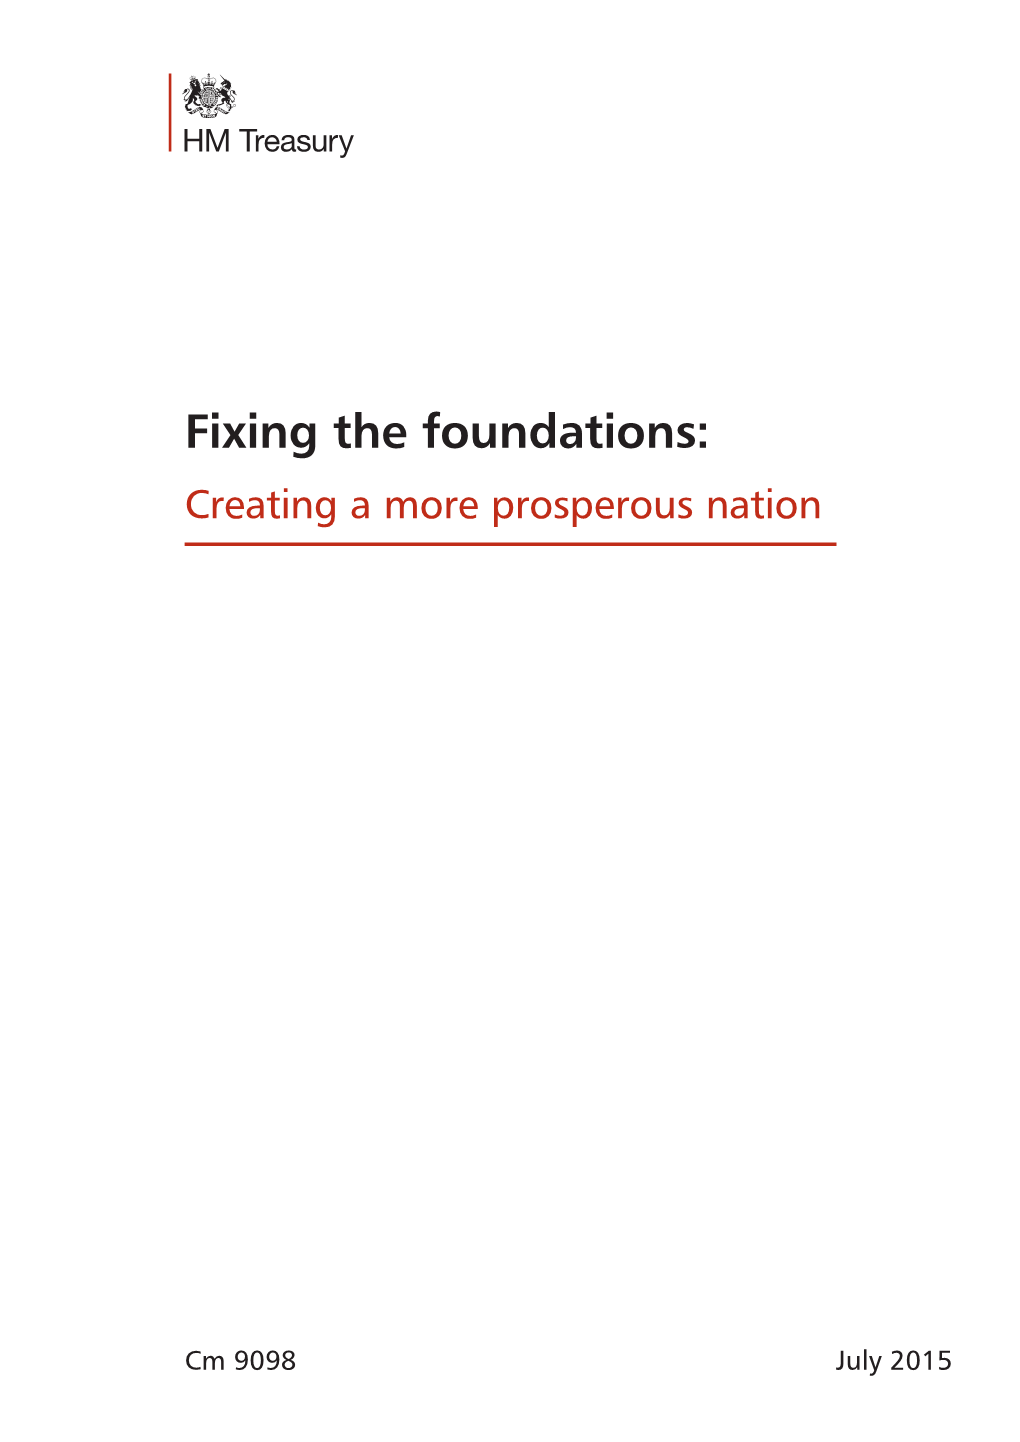 Fixing the Foundations: Creating a More Prosperous Nation